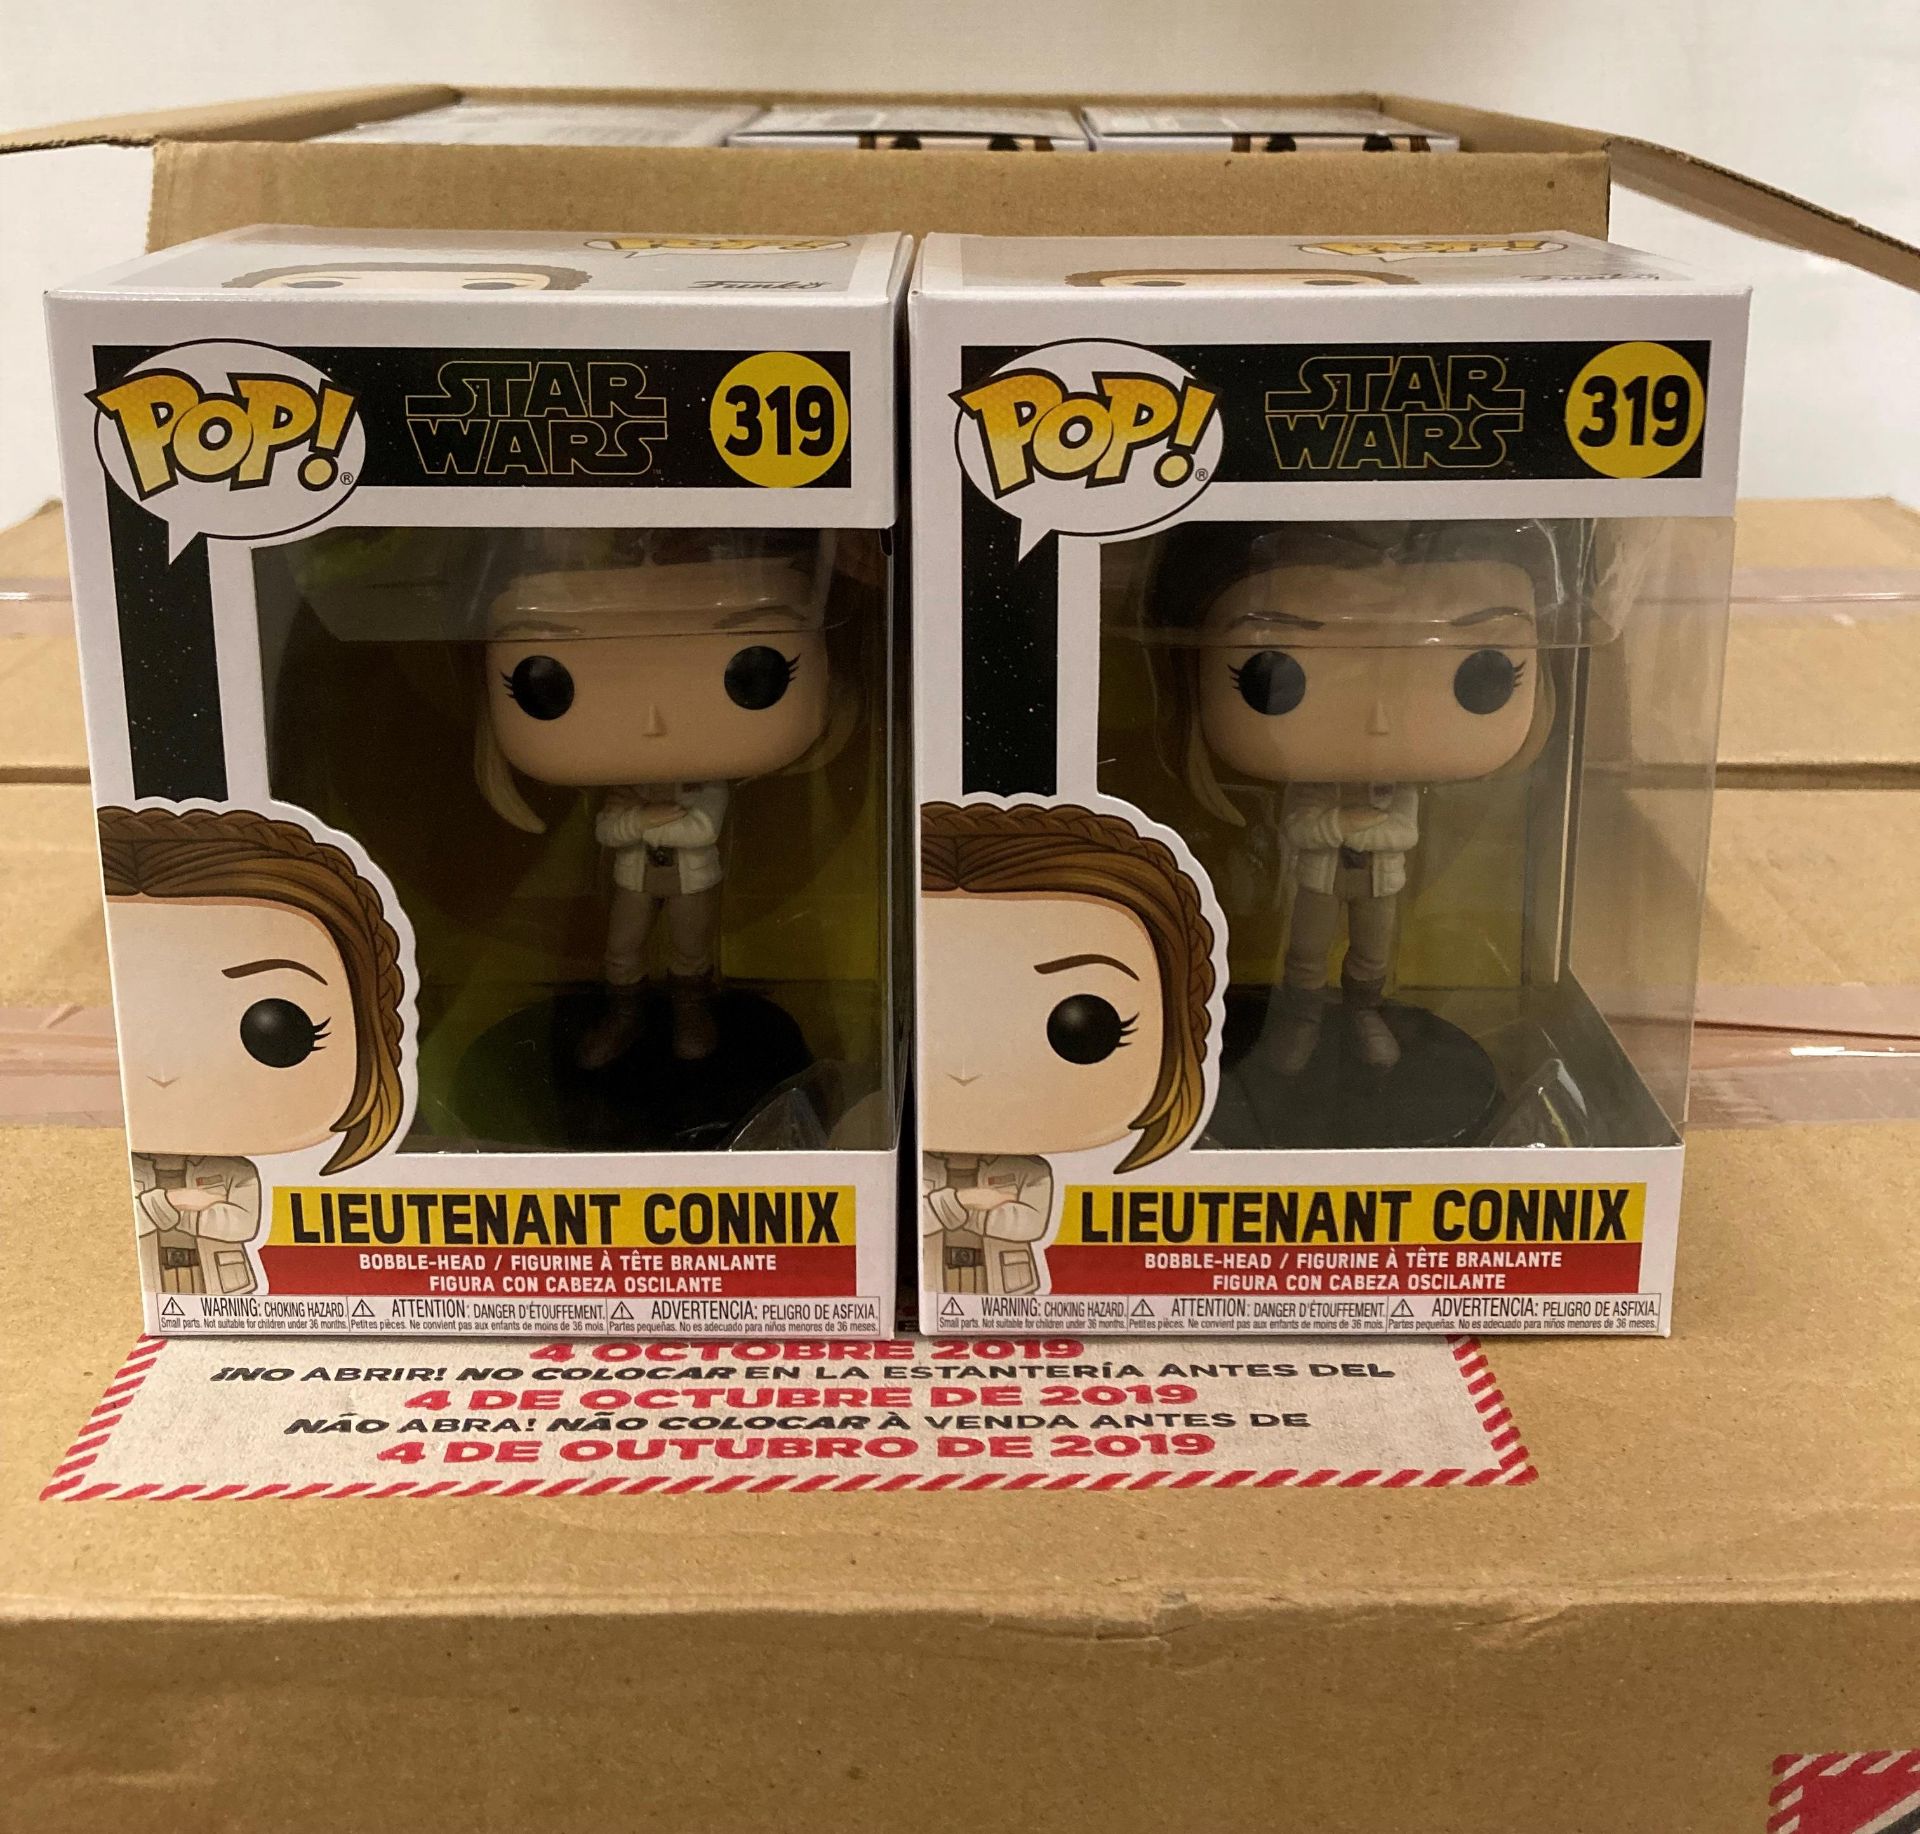 4 x Cases of 36 x Funko POP! Figurine Star Wars: The Rise of Skywalker - Lieutenant Connix - Image 2 of 2